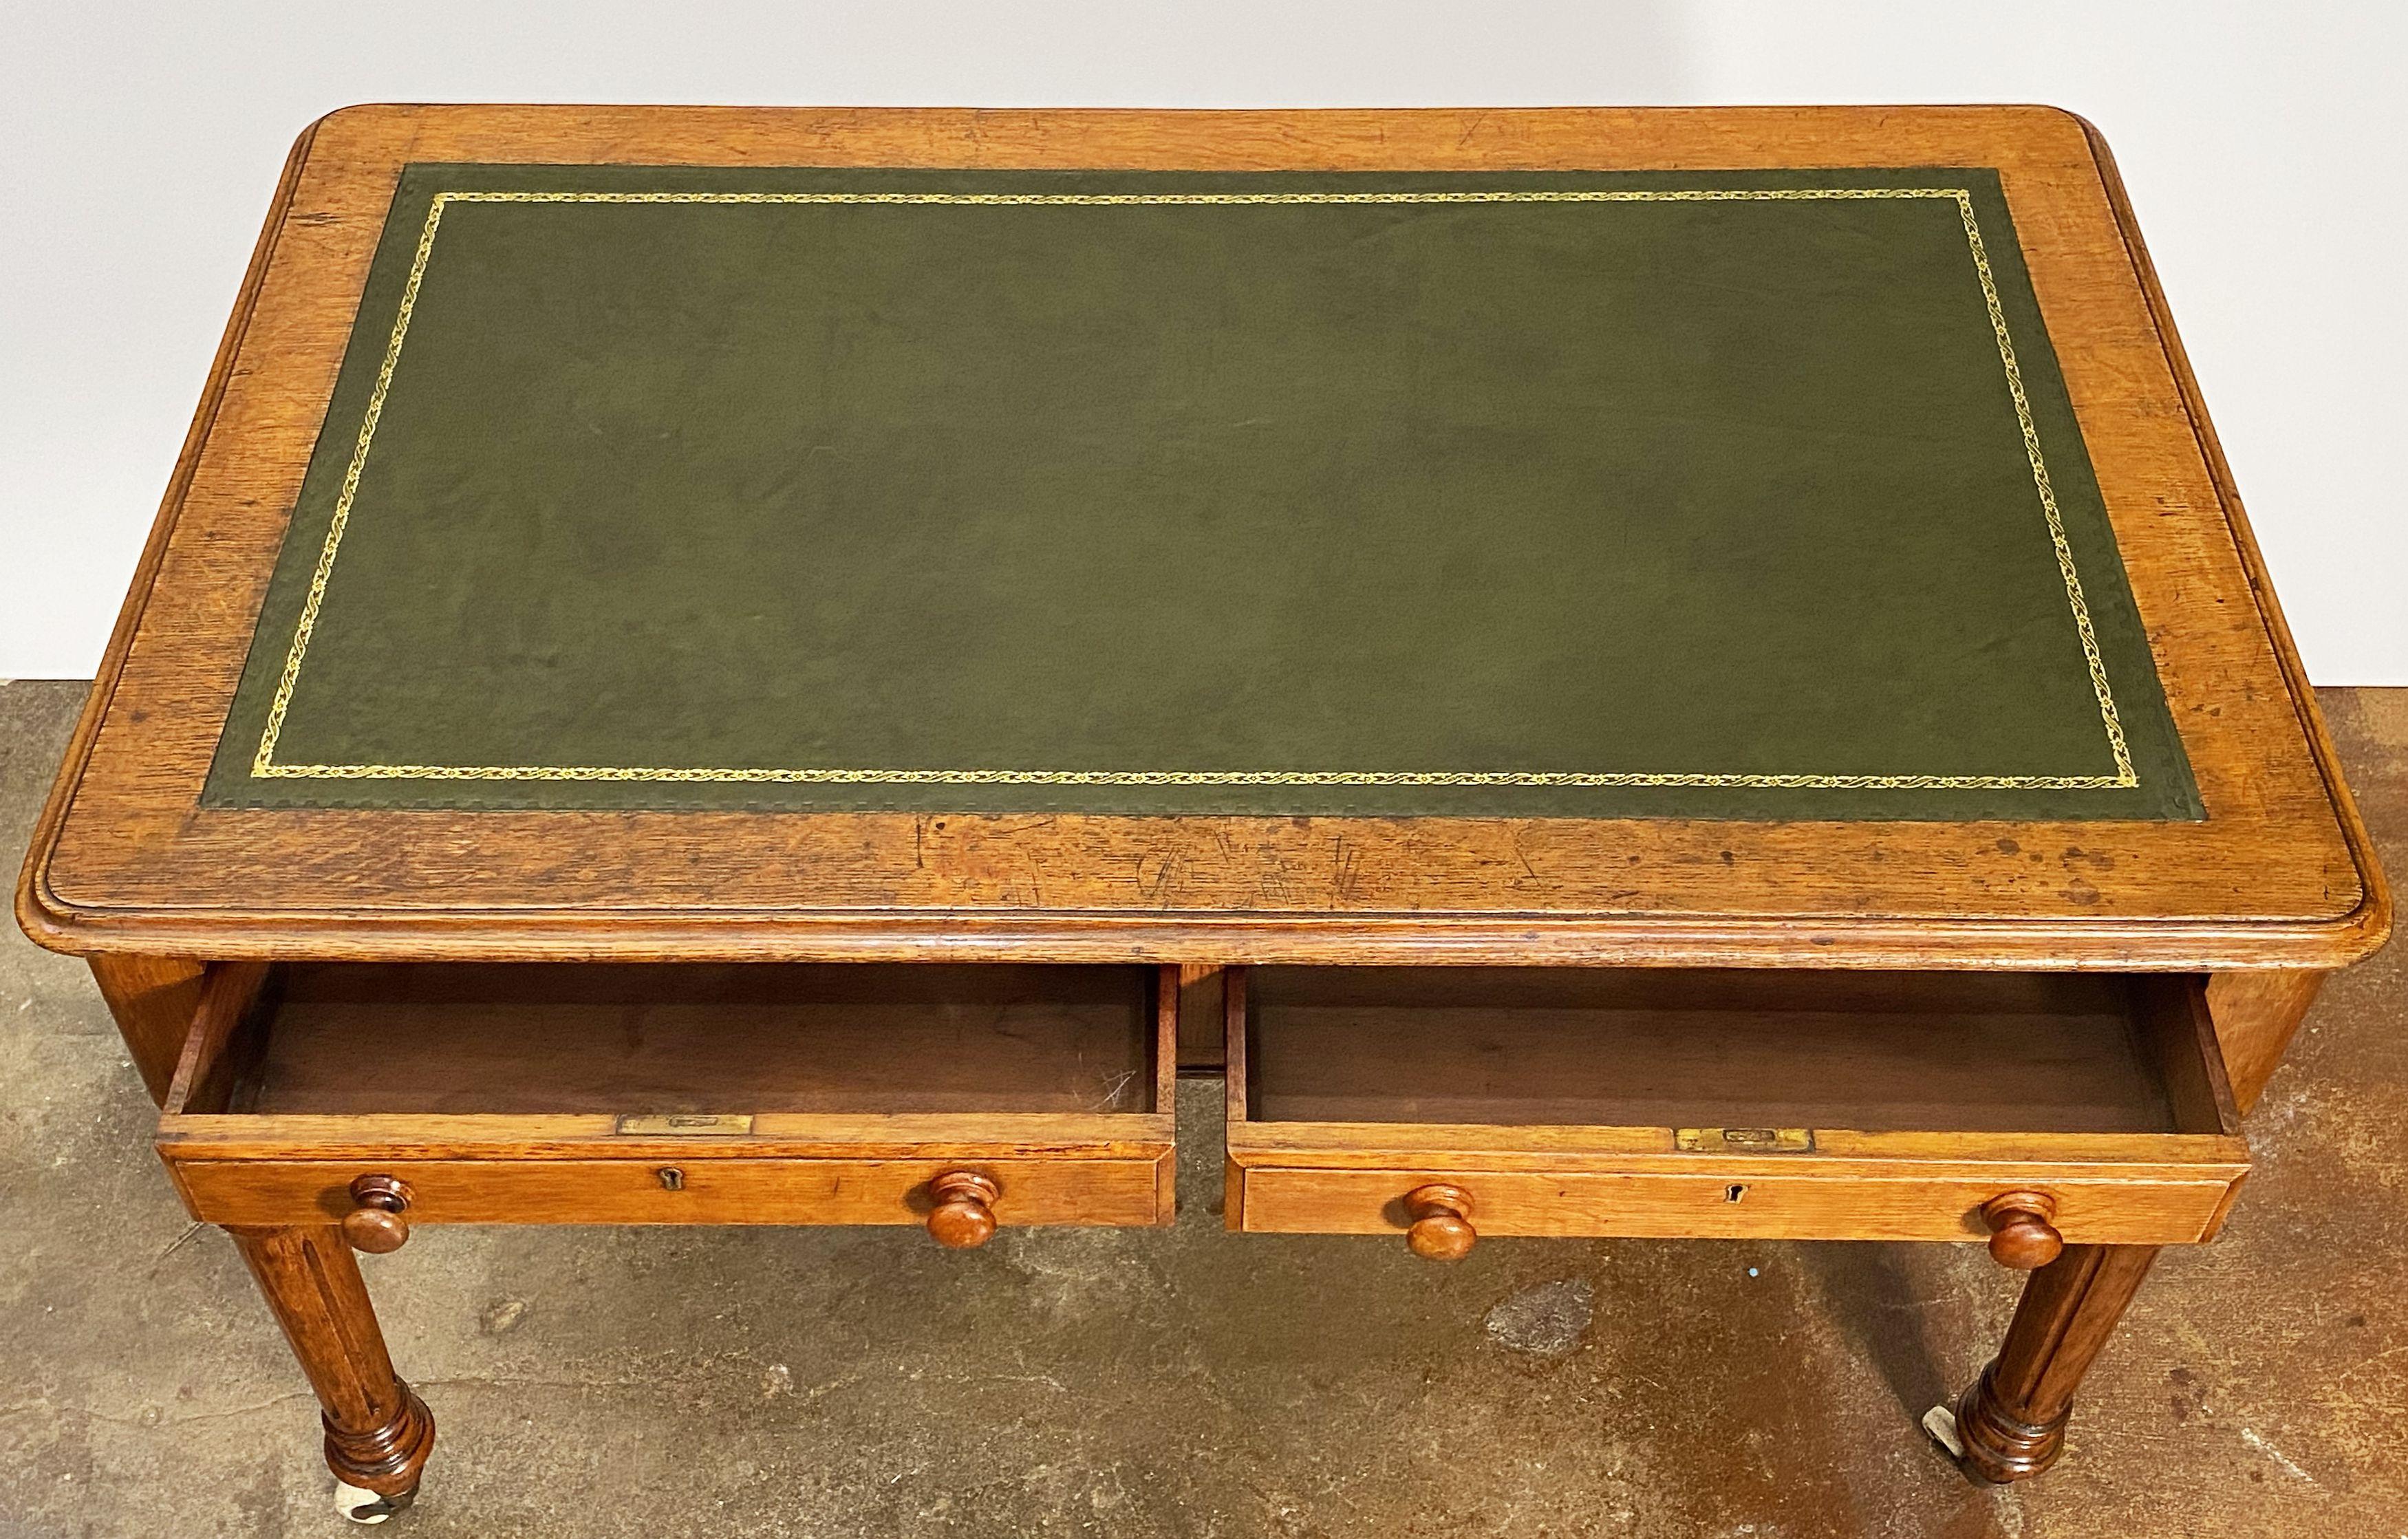 Ceramic English Writing Desk or Table of Oak with Embossed Leather Top